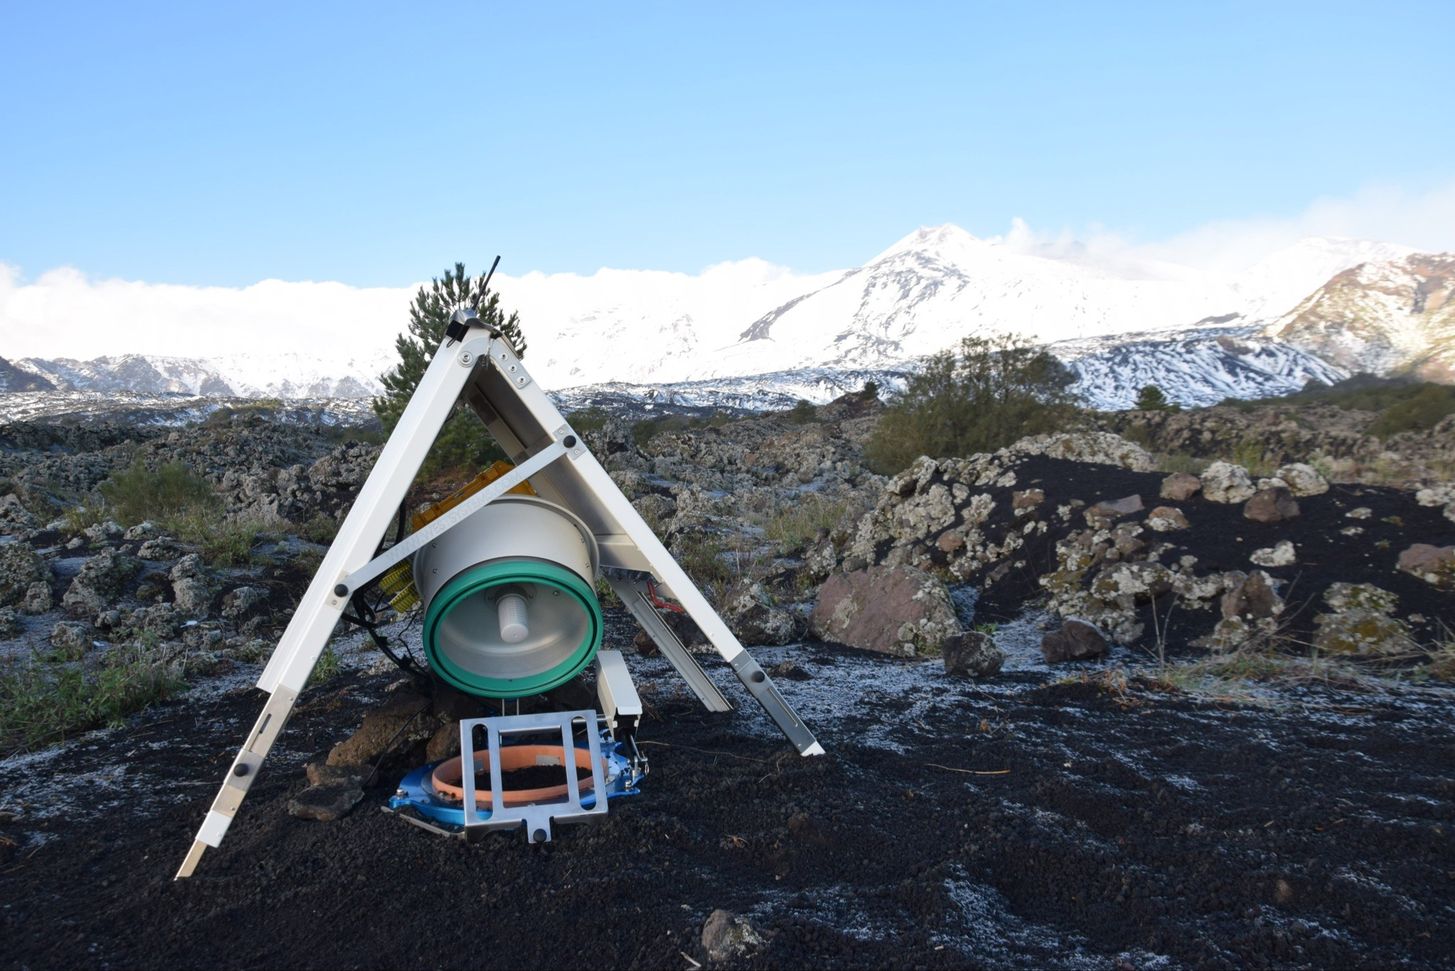 The fixed-automatic accumulation chamber installed on Mt. Etna - Sicily for soil CO2 flux measurements